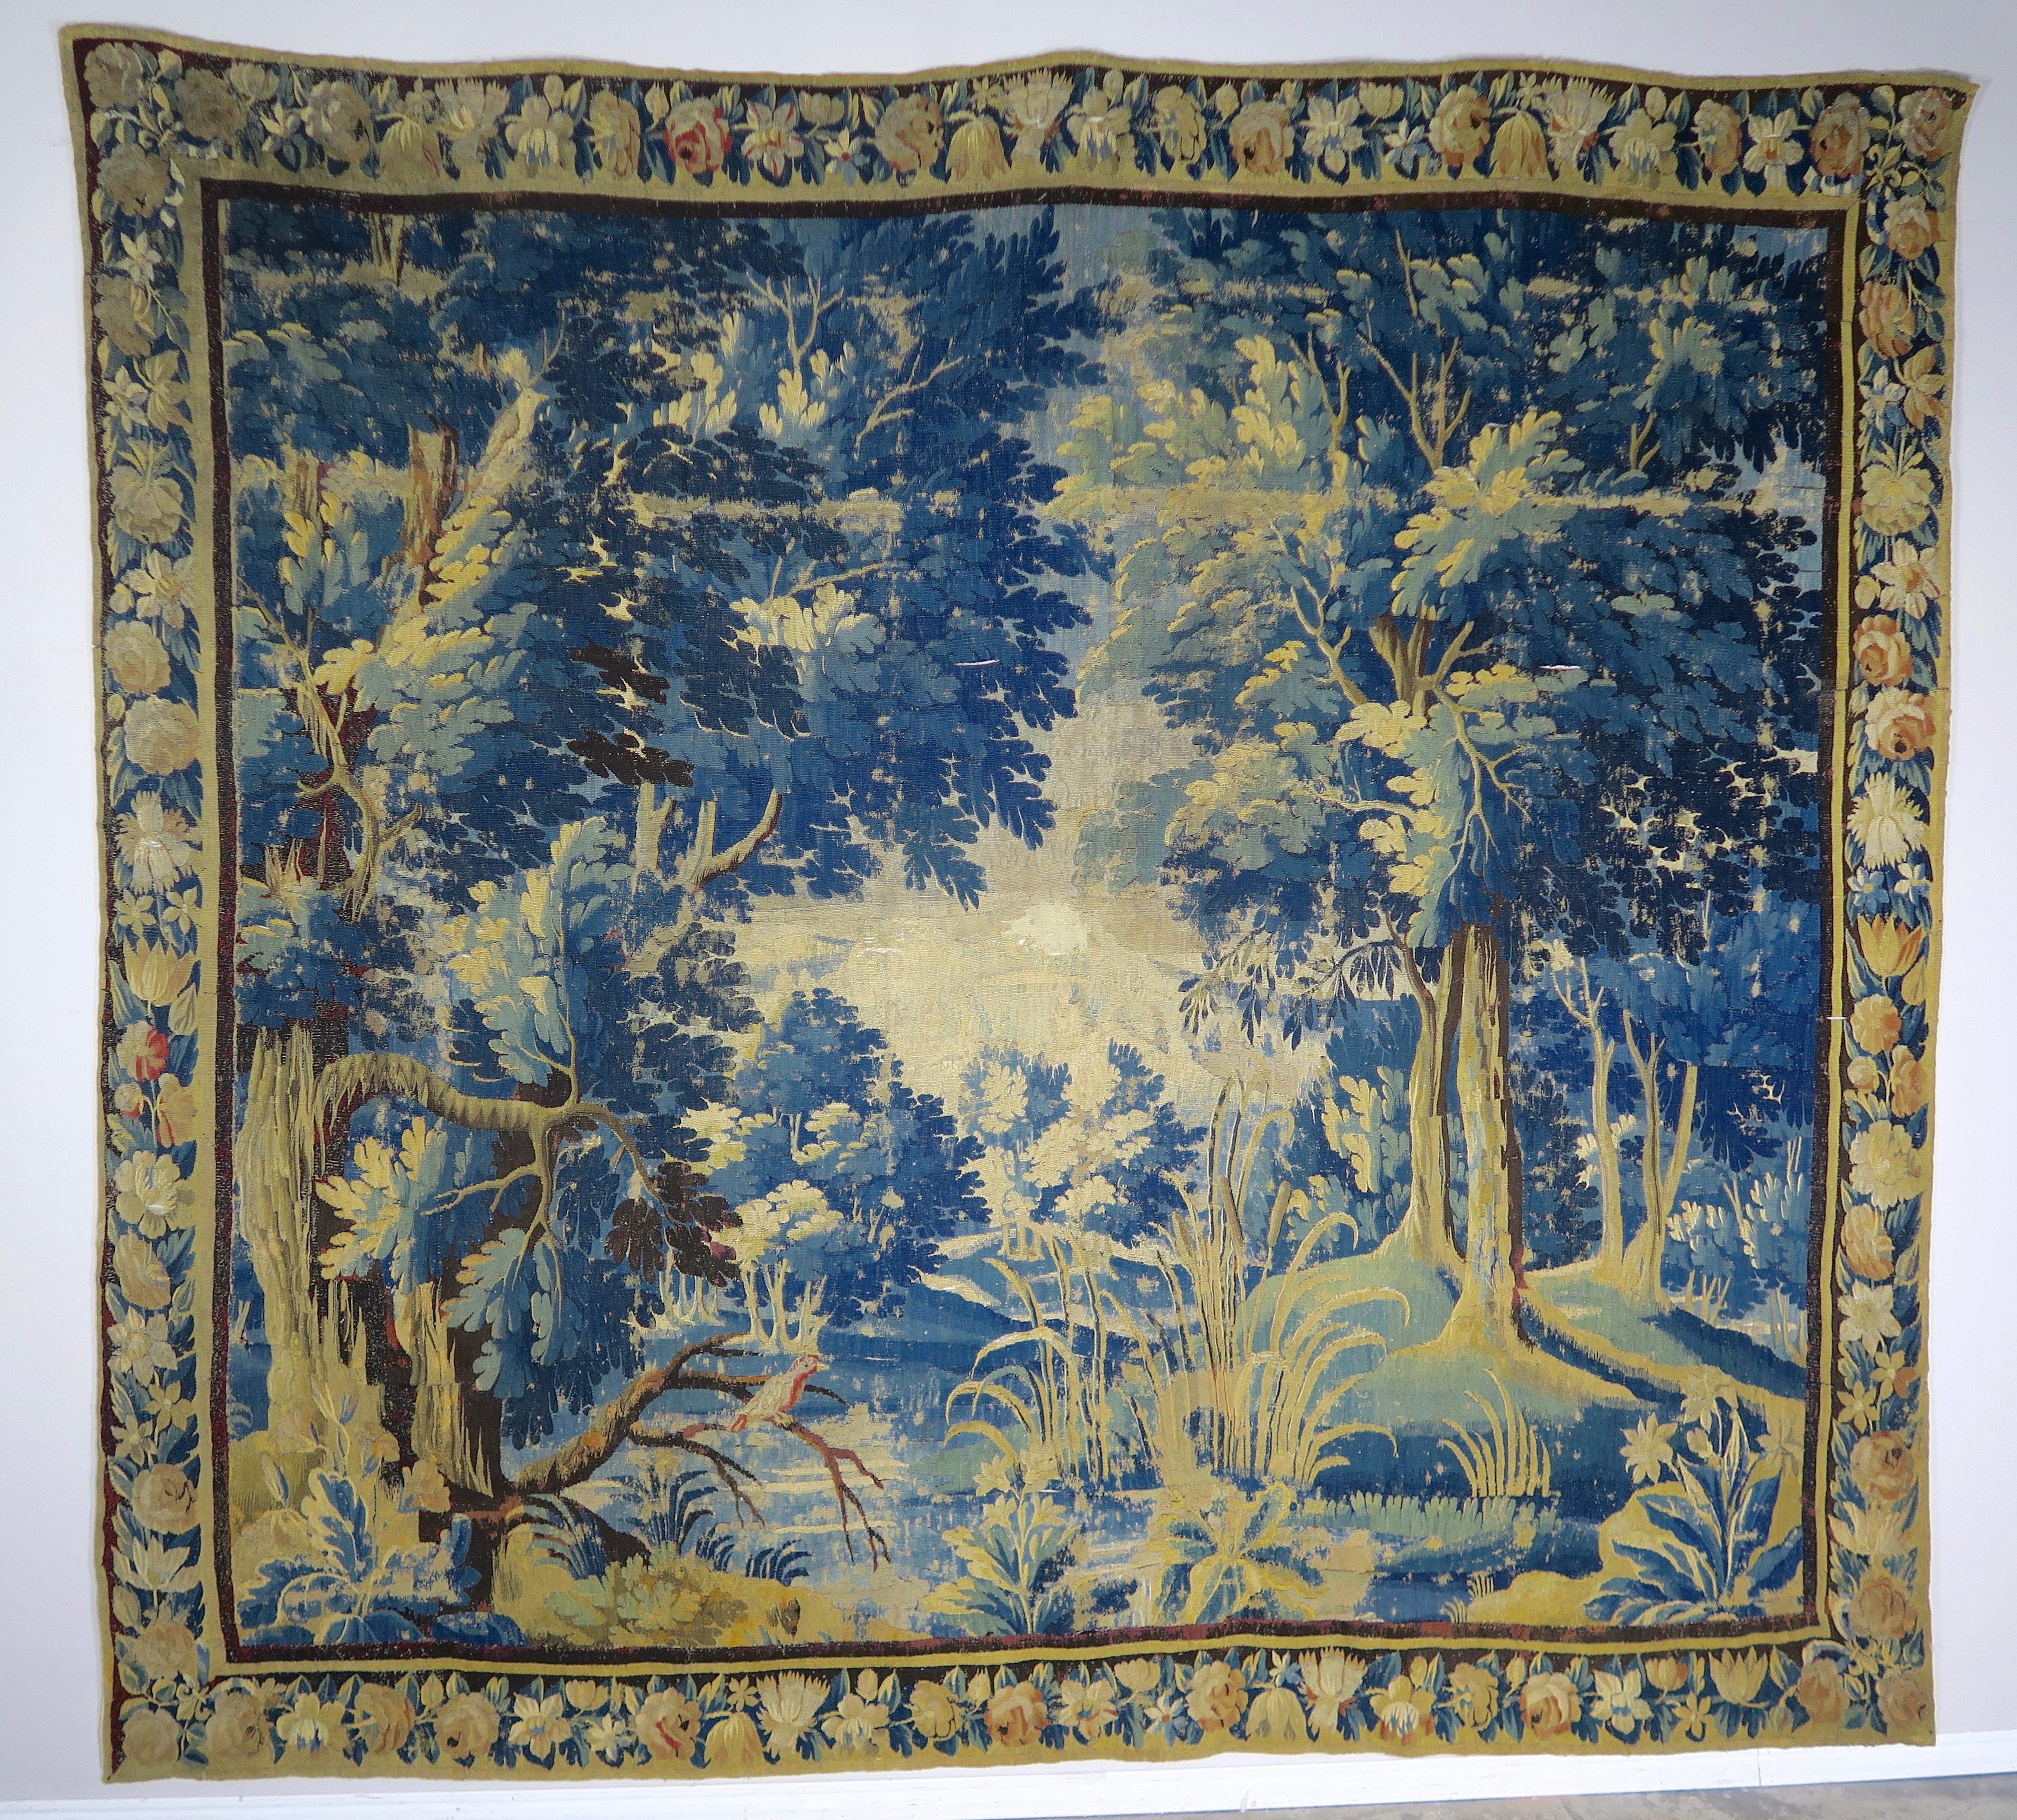 18th century Flemish Verdure tapestry depicting birds and a beautiful scene of foliage and trees throughout. The tapestry is handmade in both silk and wool with vibrant hues of greens, blues, gold and more. Good overall condition with areas of